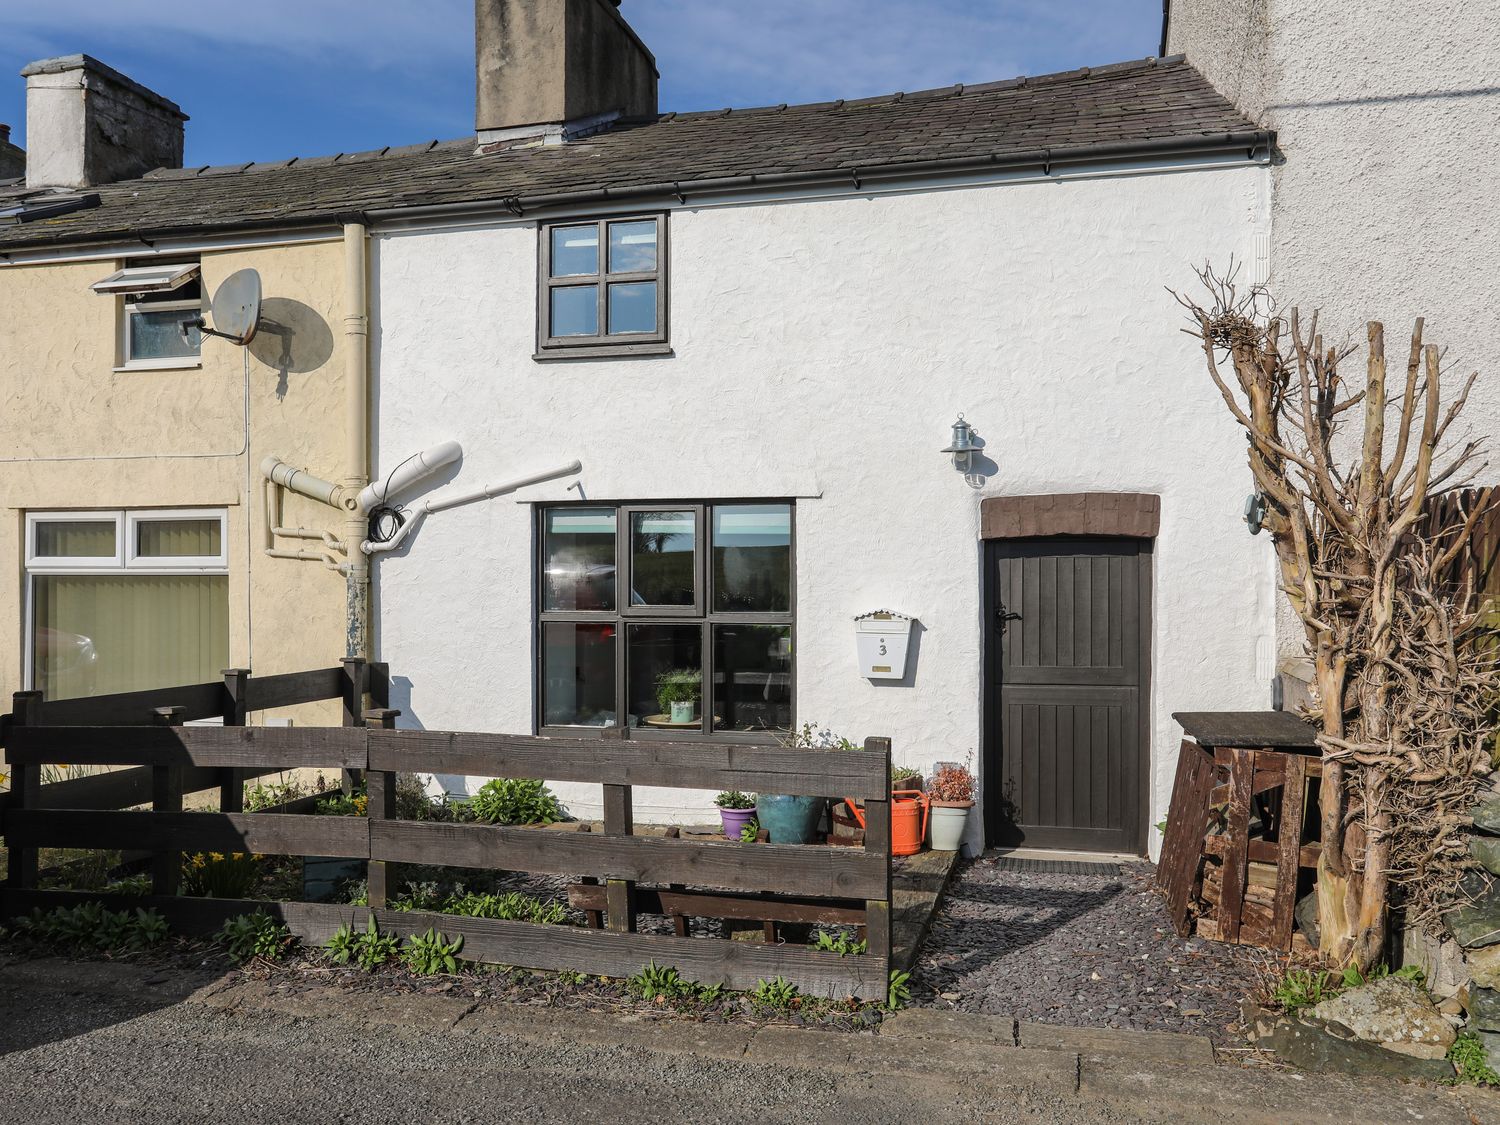 3 Lon Fawr - Anglesey - 1096841 - photo 1